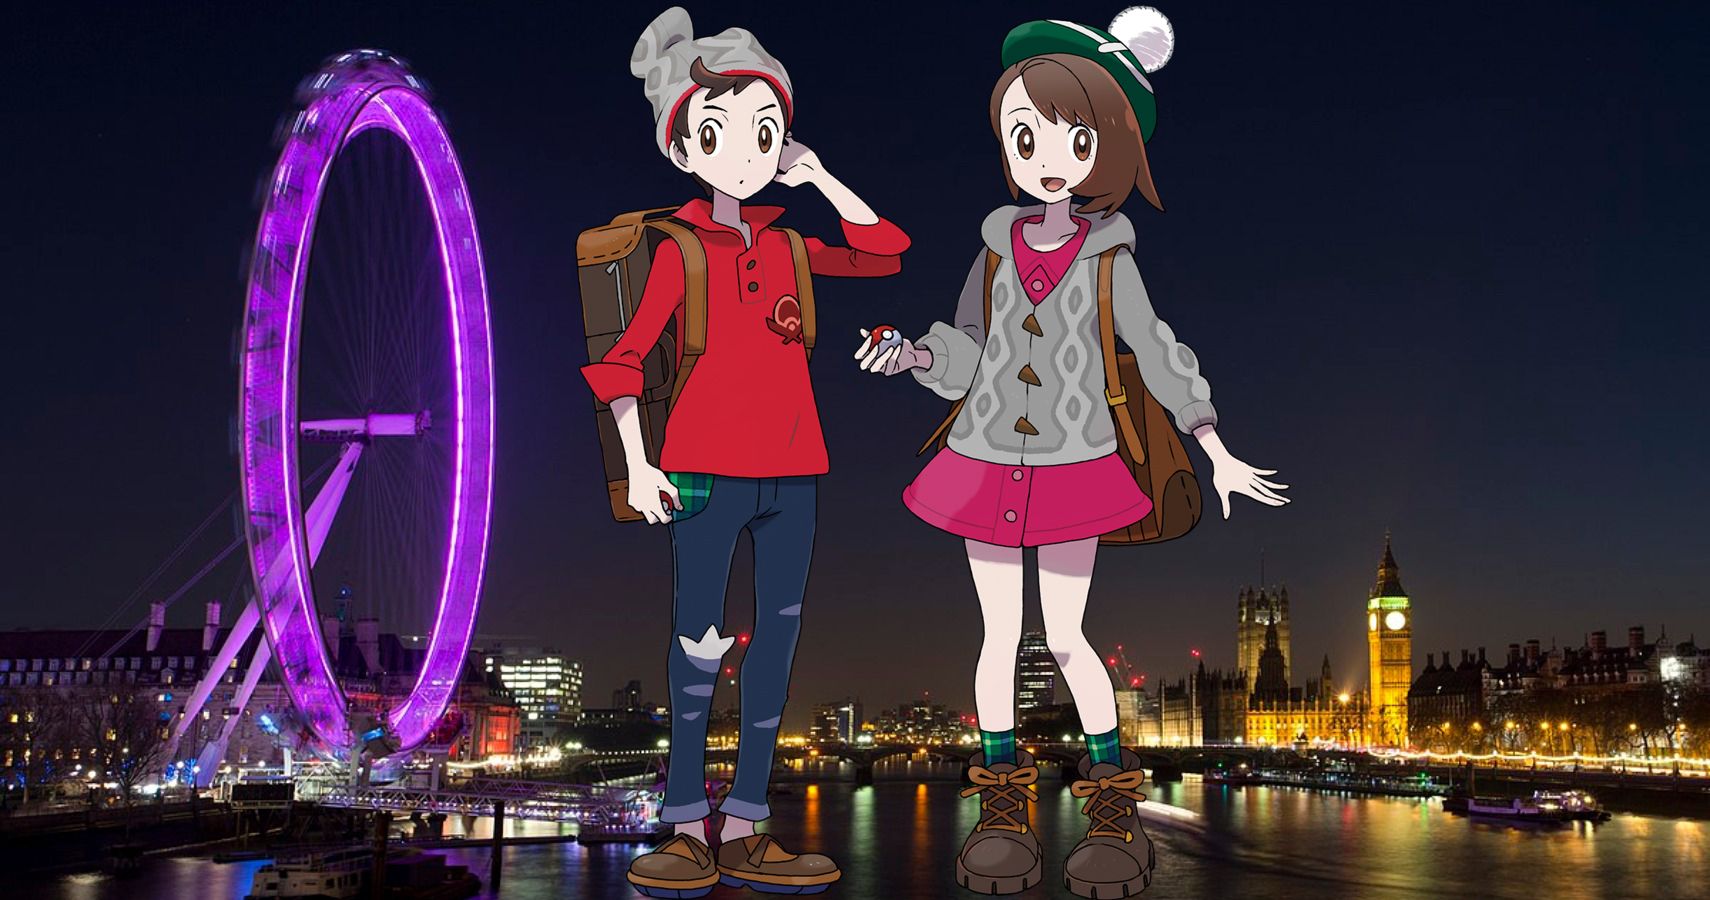 These Are The UK Cities That Inspired The Galar Region In Pokémon Sword & Shield